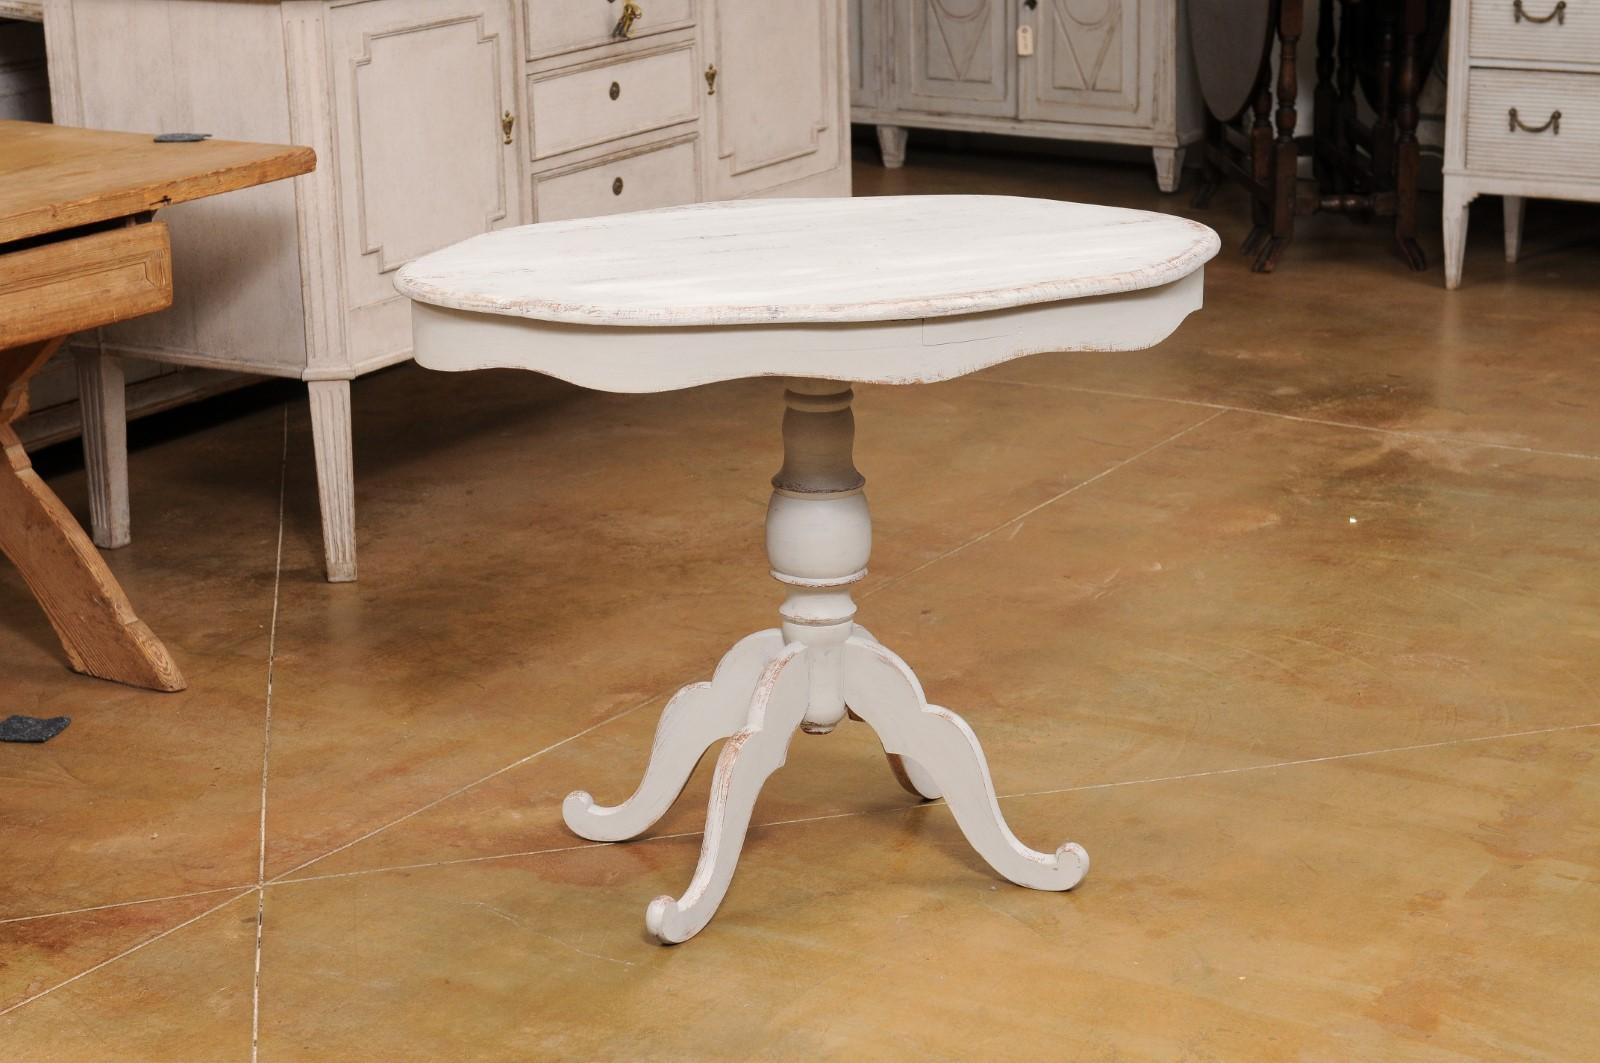 Swedish 1860s Painted Oval Pedestal Table with Carved Apron and Quadripod Base In Good Condition For Sale In Atlanta, GA